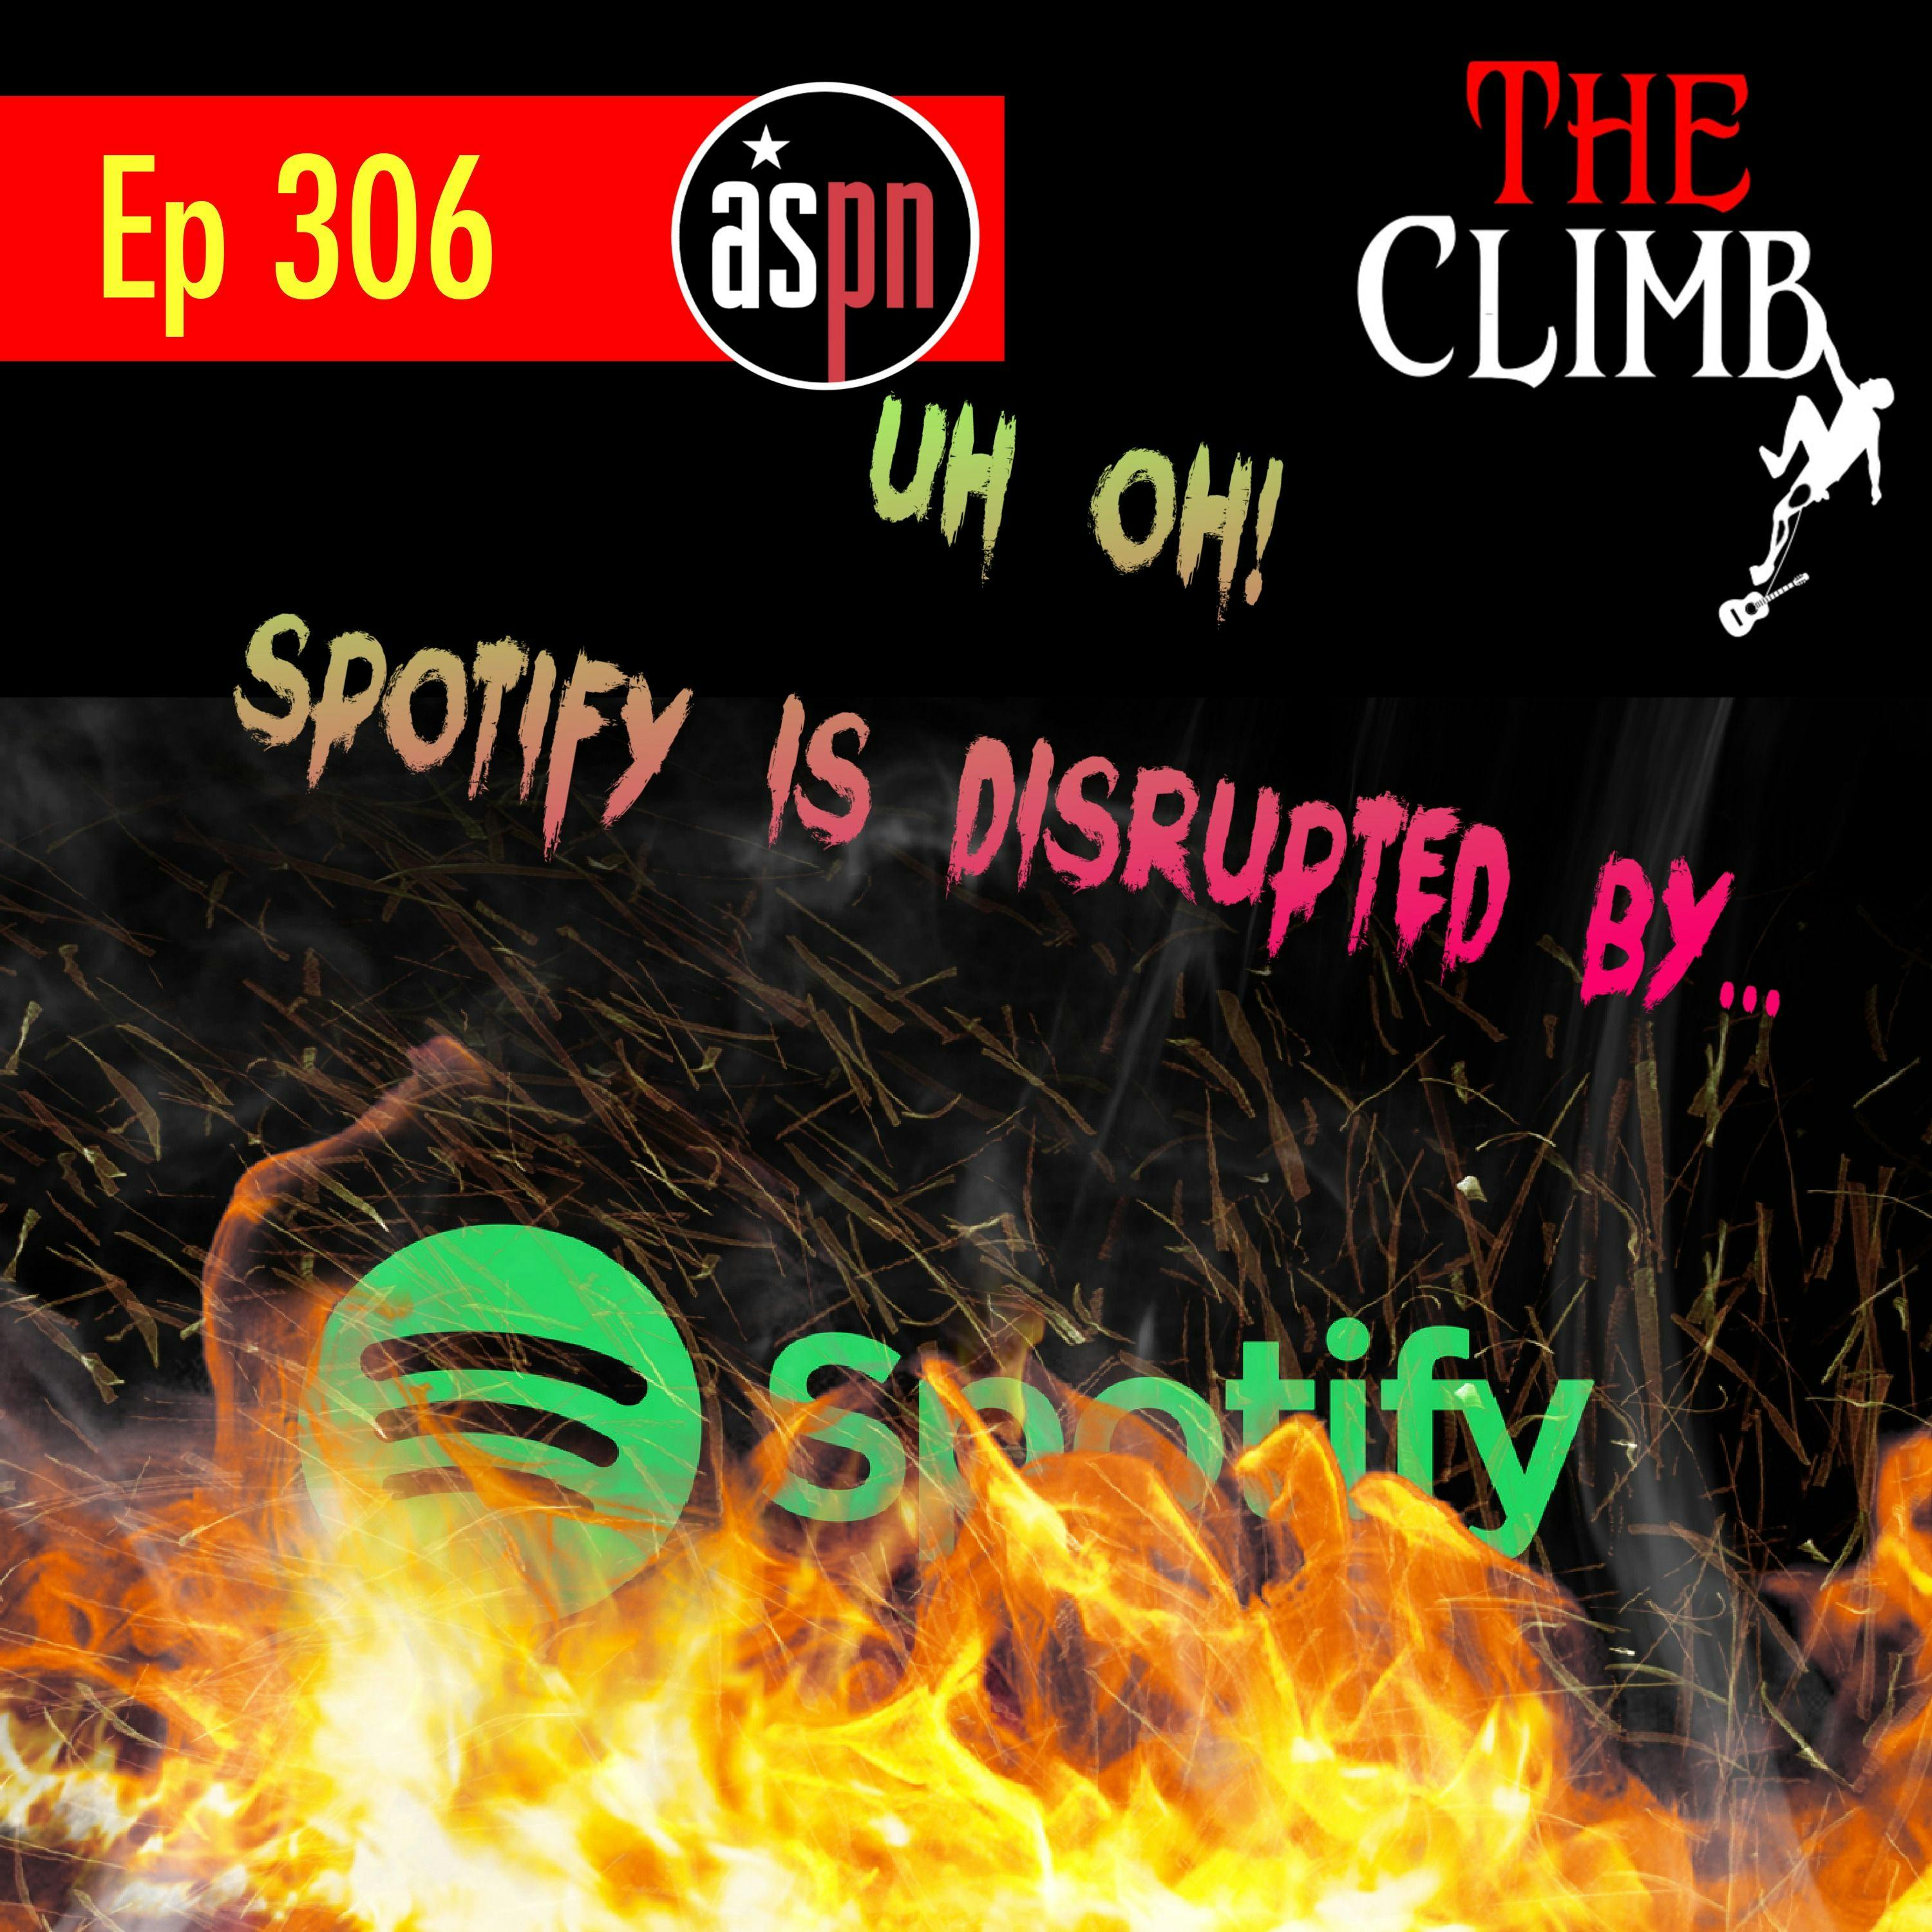 Ep 306: Uh Oh! Spotify Is Disrupted By...